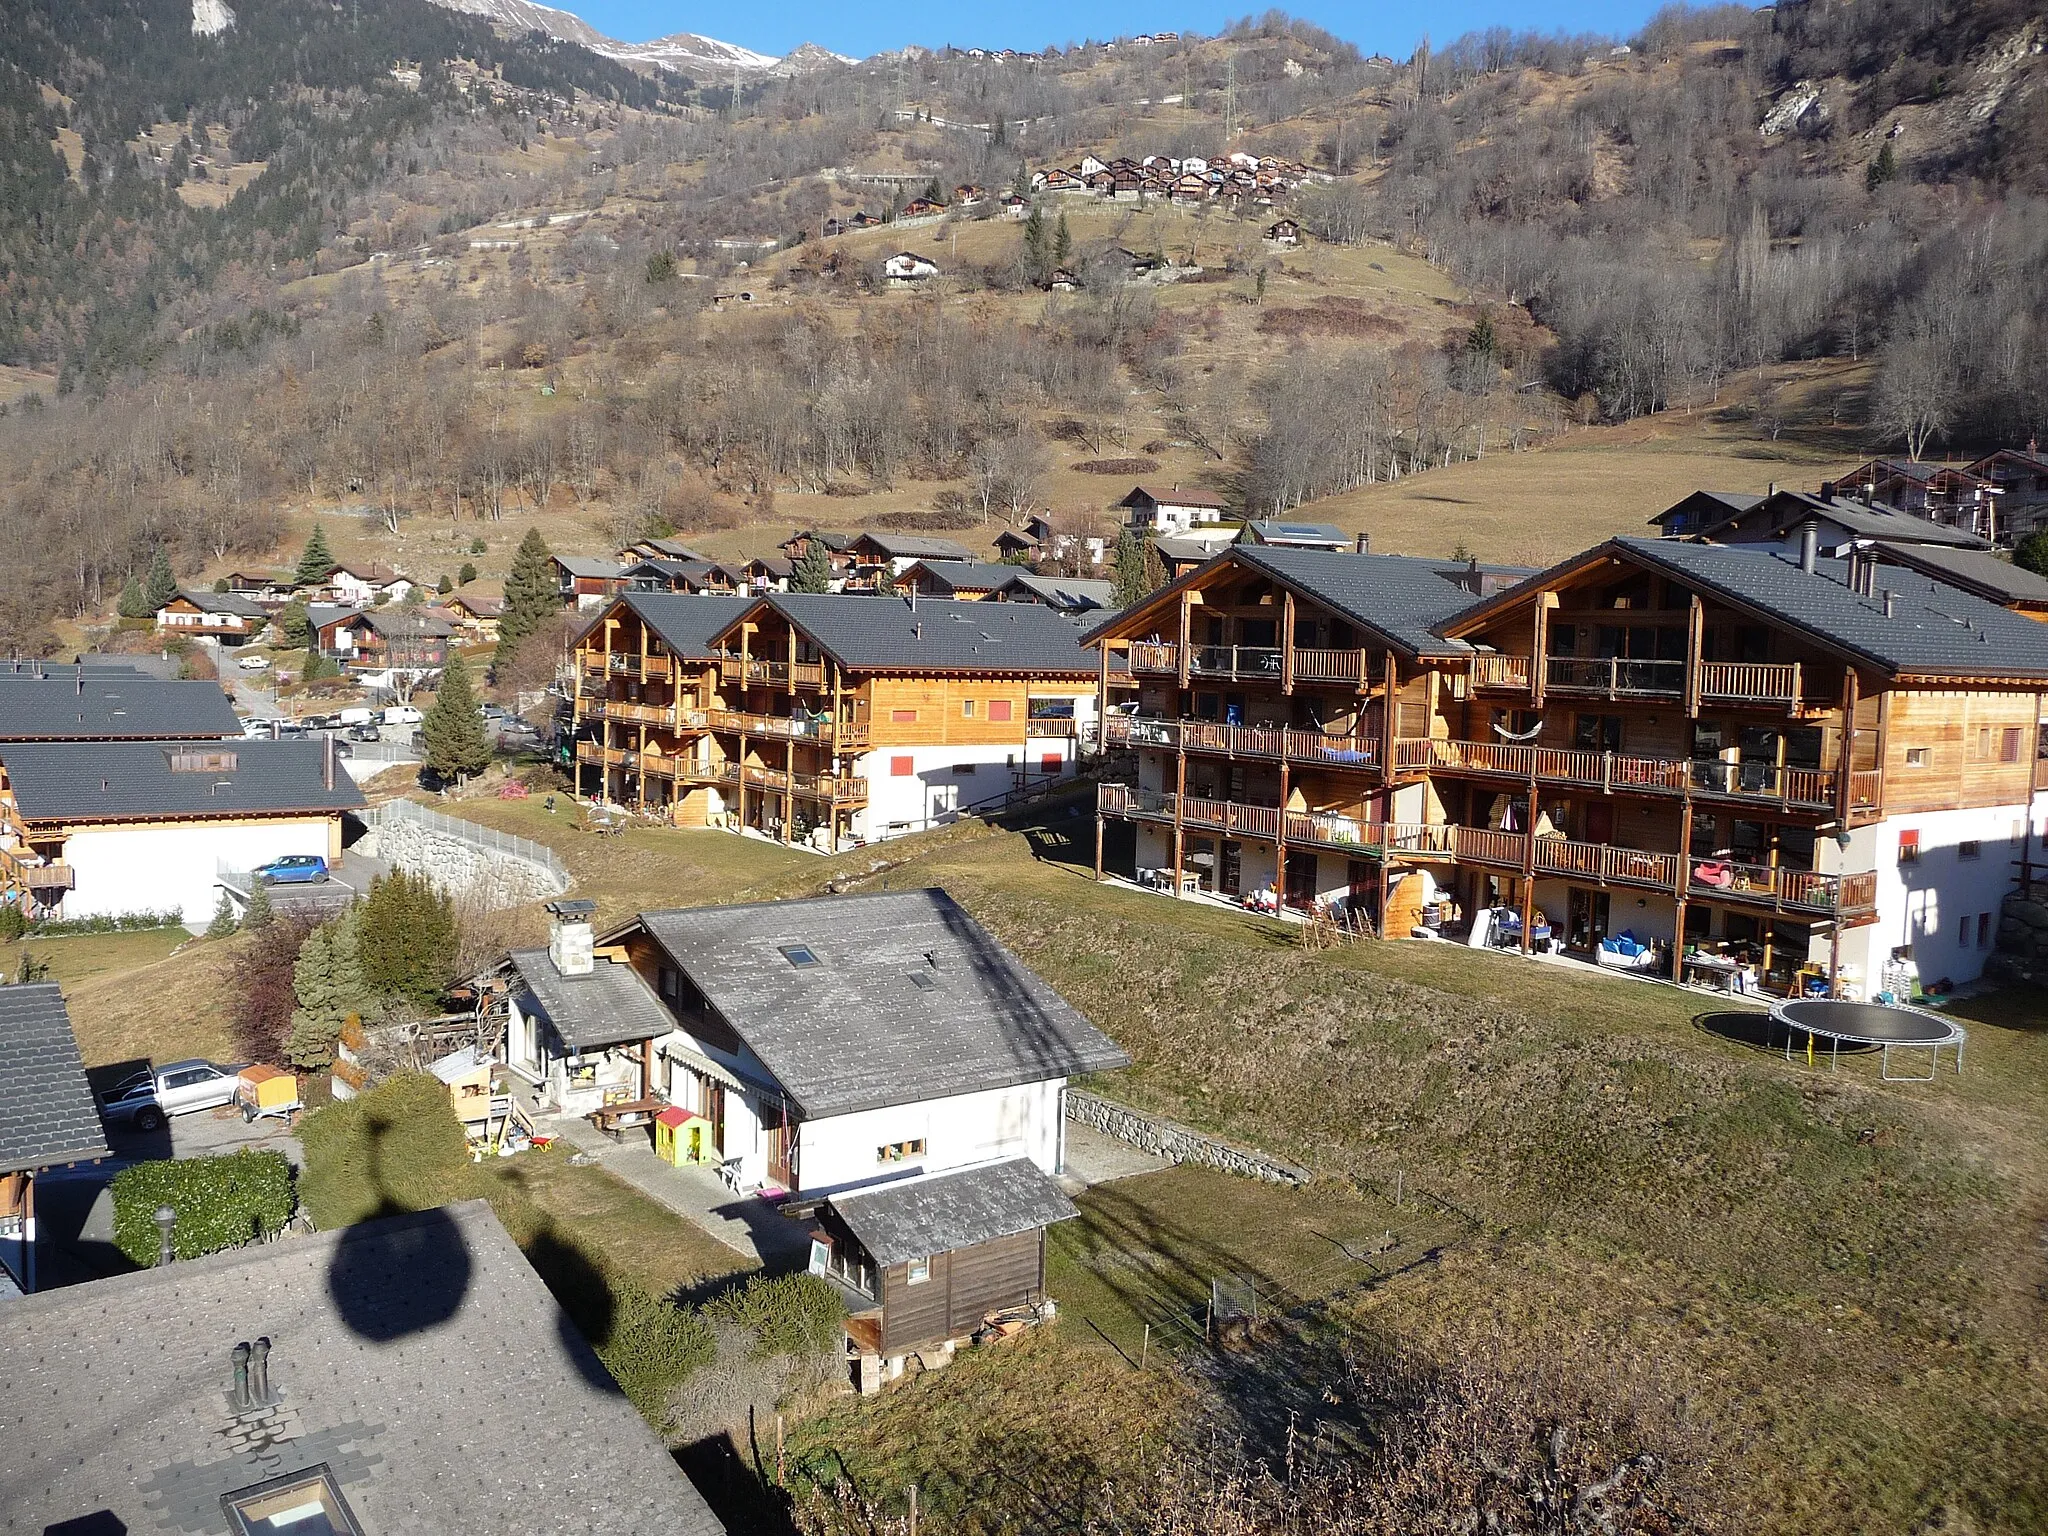 Photo showing: Le Châble is a village in Bagnes, Valais, Switzerland, below the ski resort of Verbier.